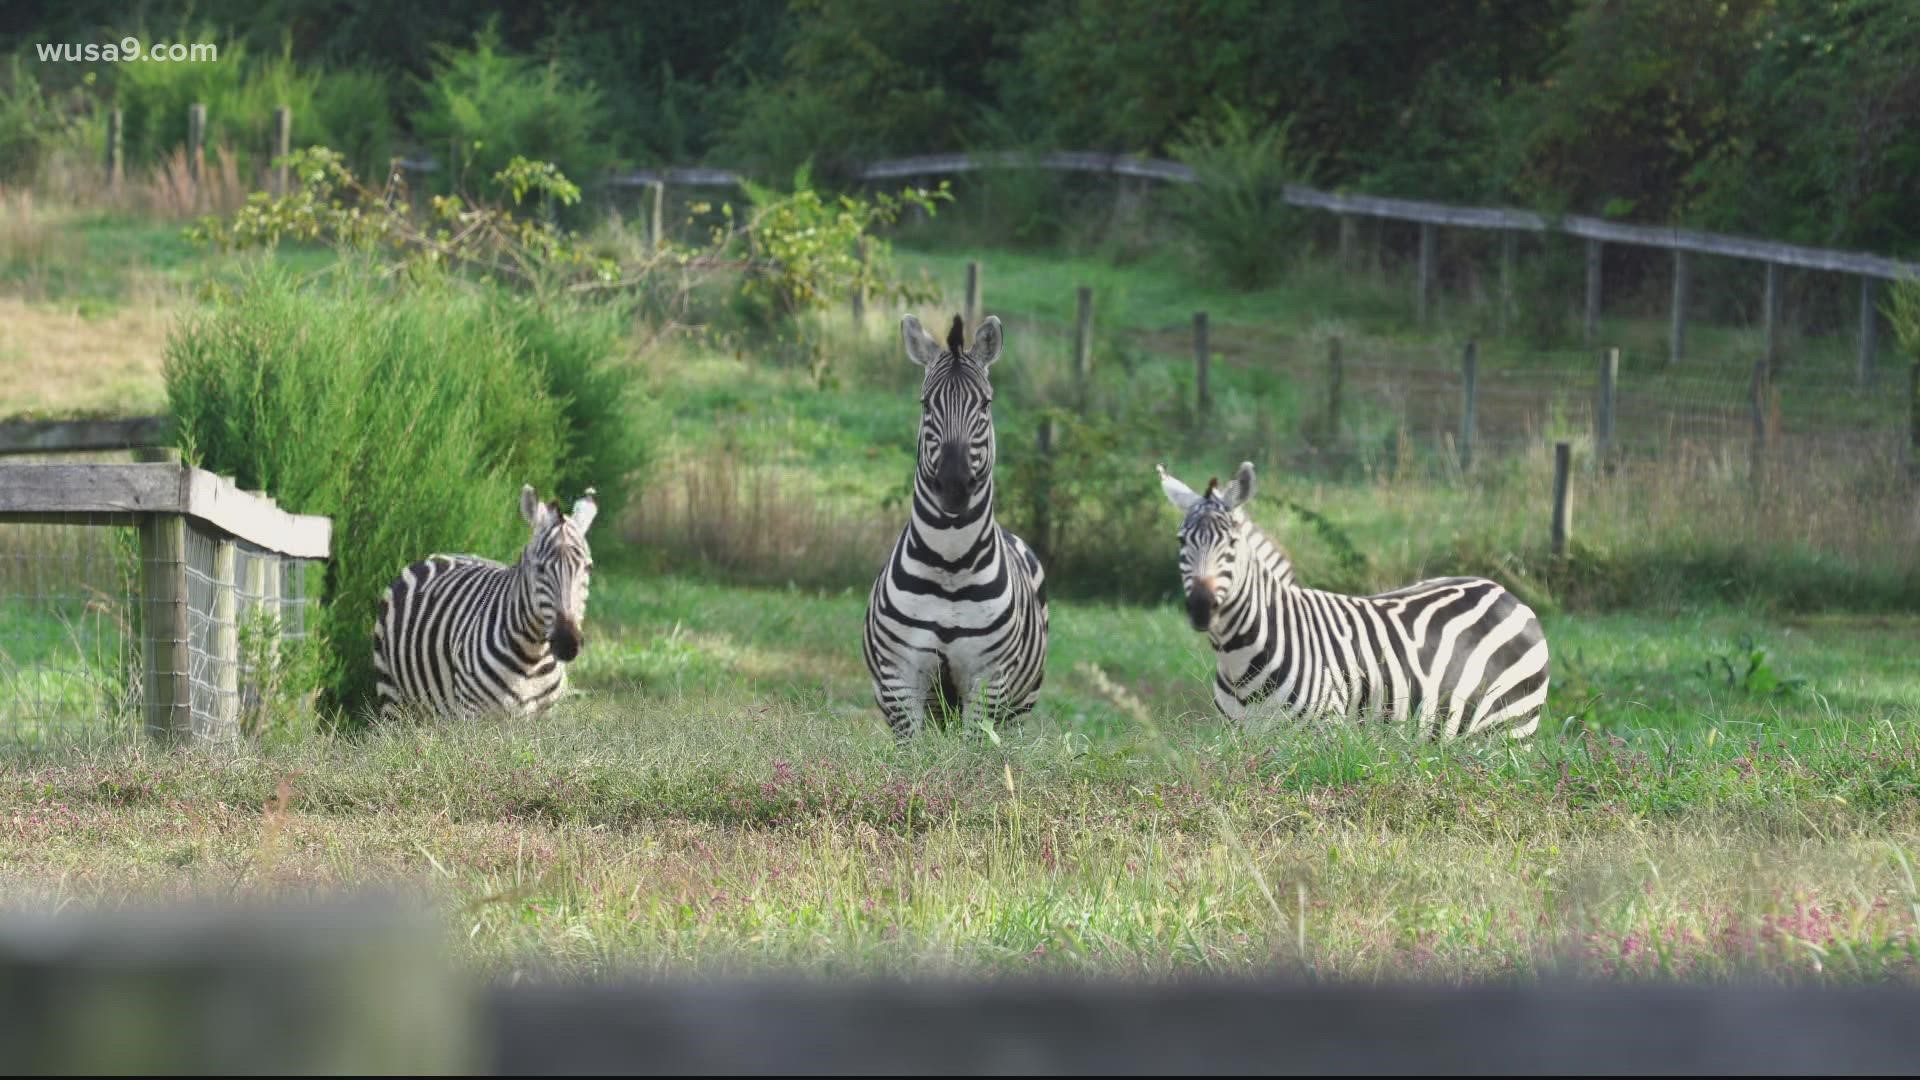 WUSA 9 tracked down a private zebra owner. We toured his private Cecil County farm that house three zebras.